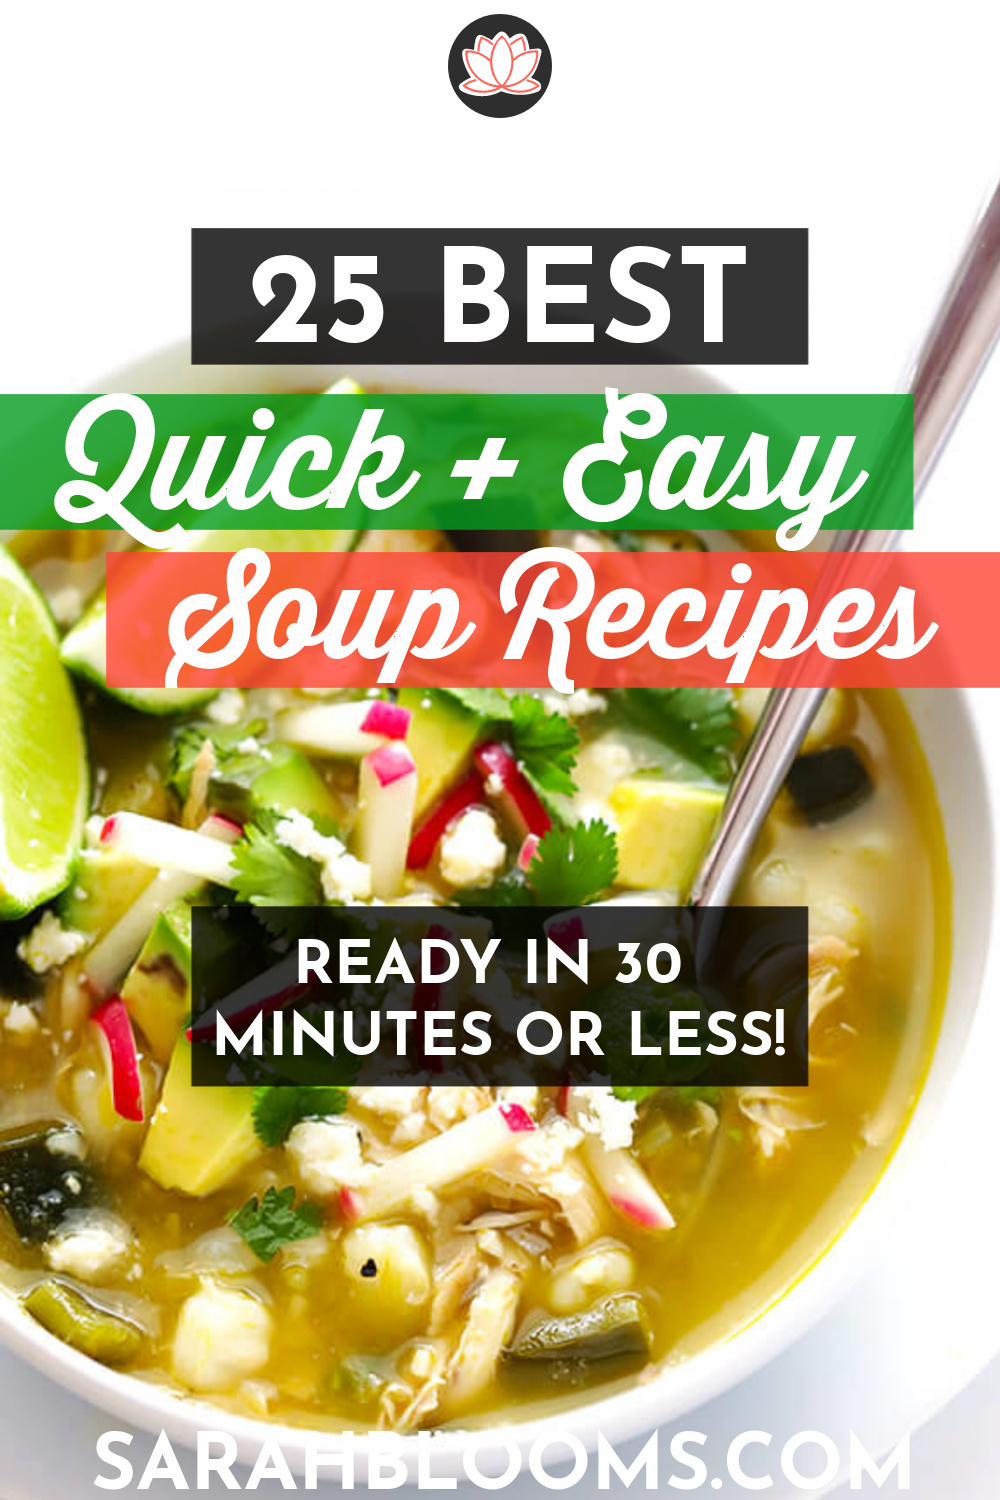 Eat great any night of the week with these 25 Best Quick Soups ready in 30 minutes or less! #souprecipes #quicksoups #quicksouprecipes #quickmeals #weeknightmeals #easymeals #quickandeasymeals